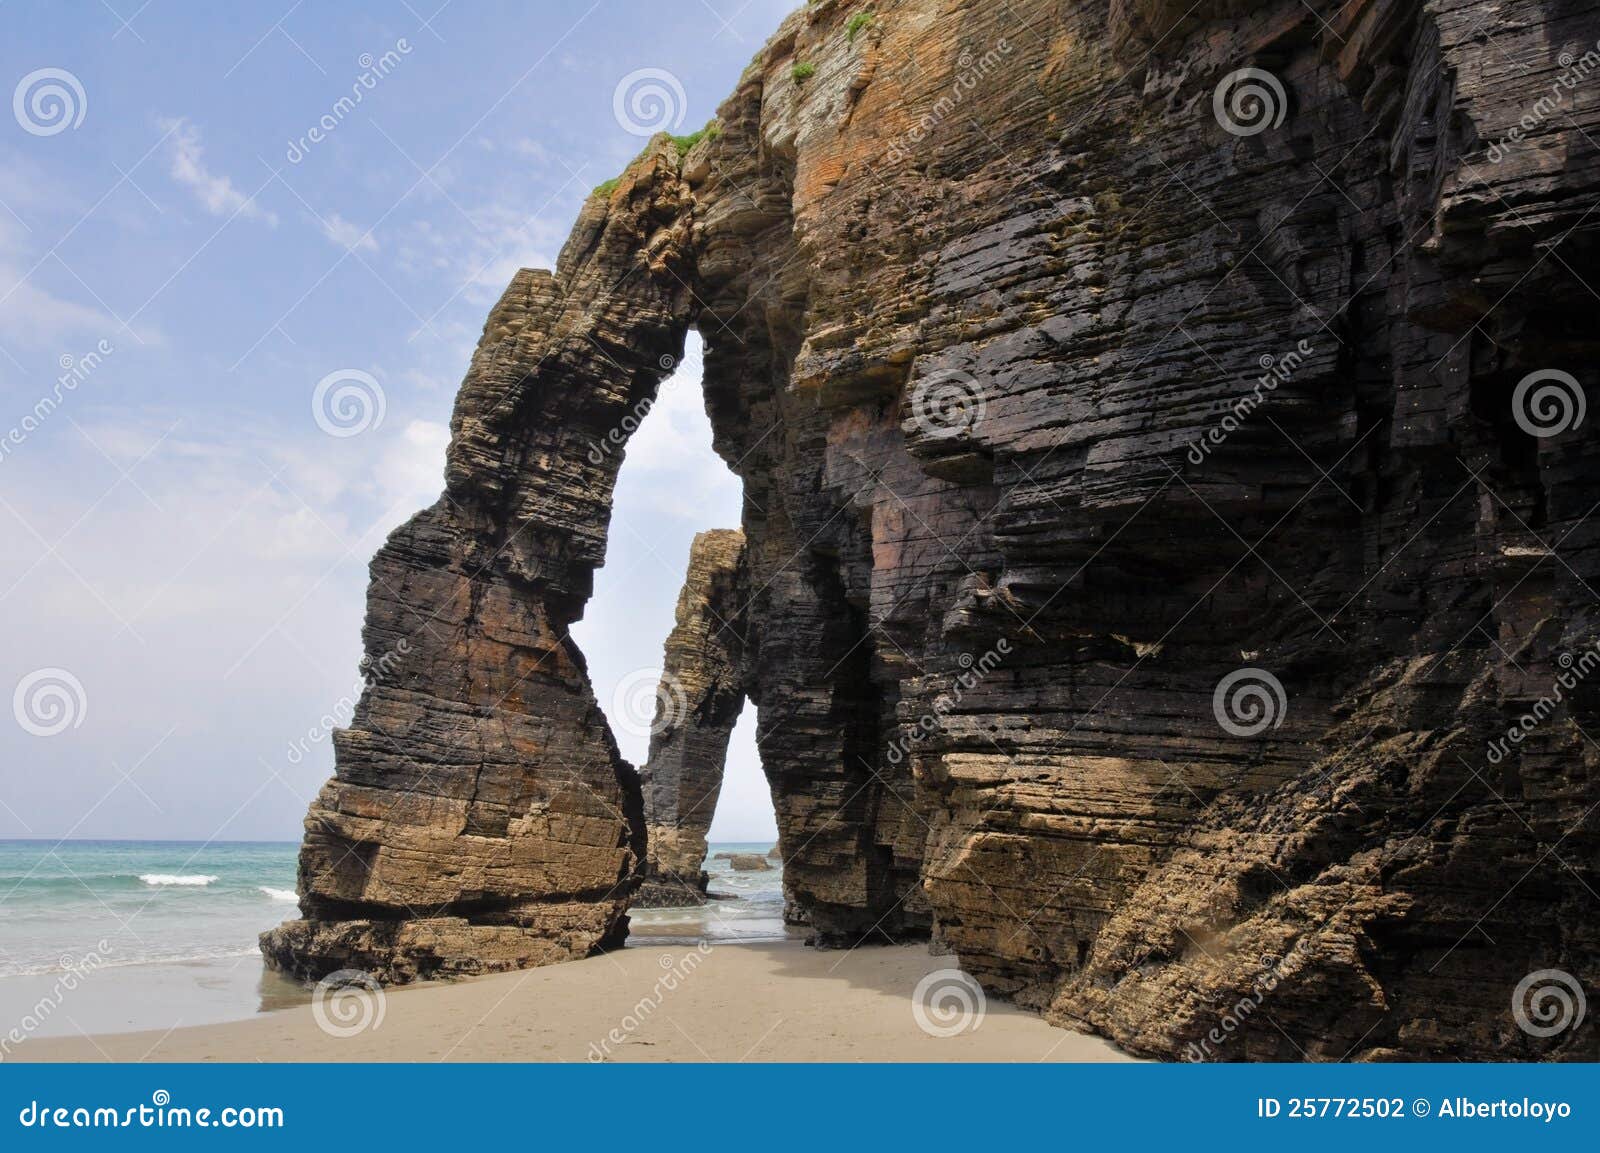 the beach of the cathedrals (spain)